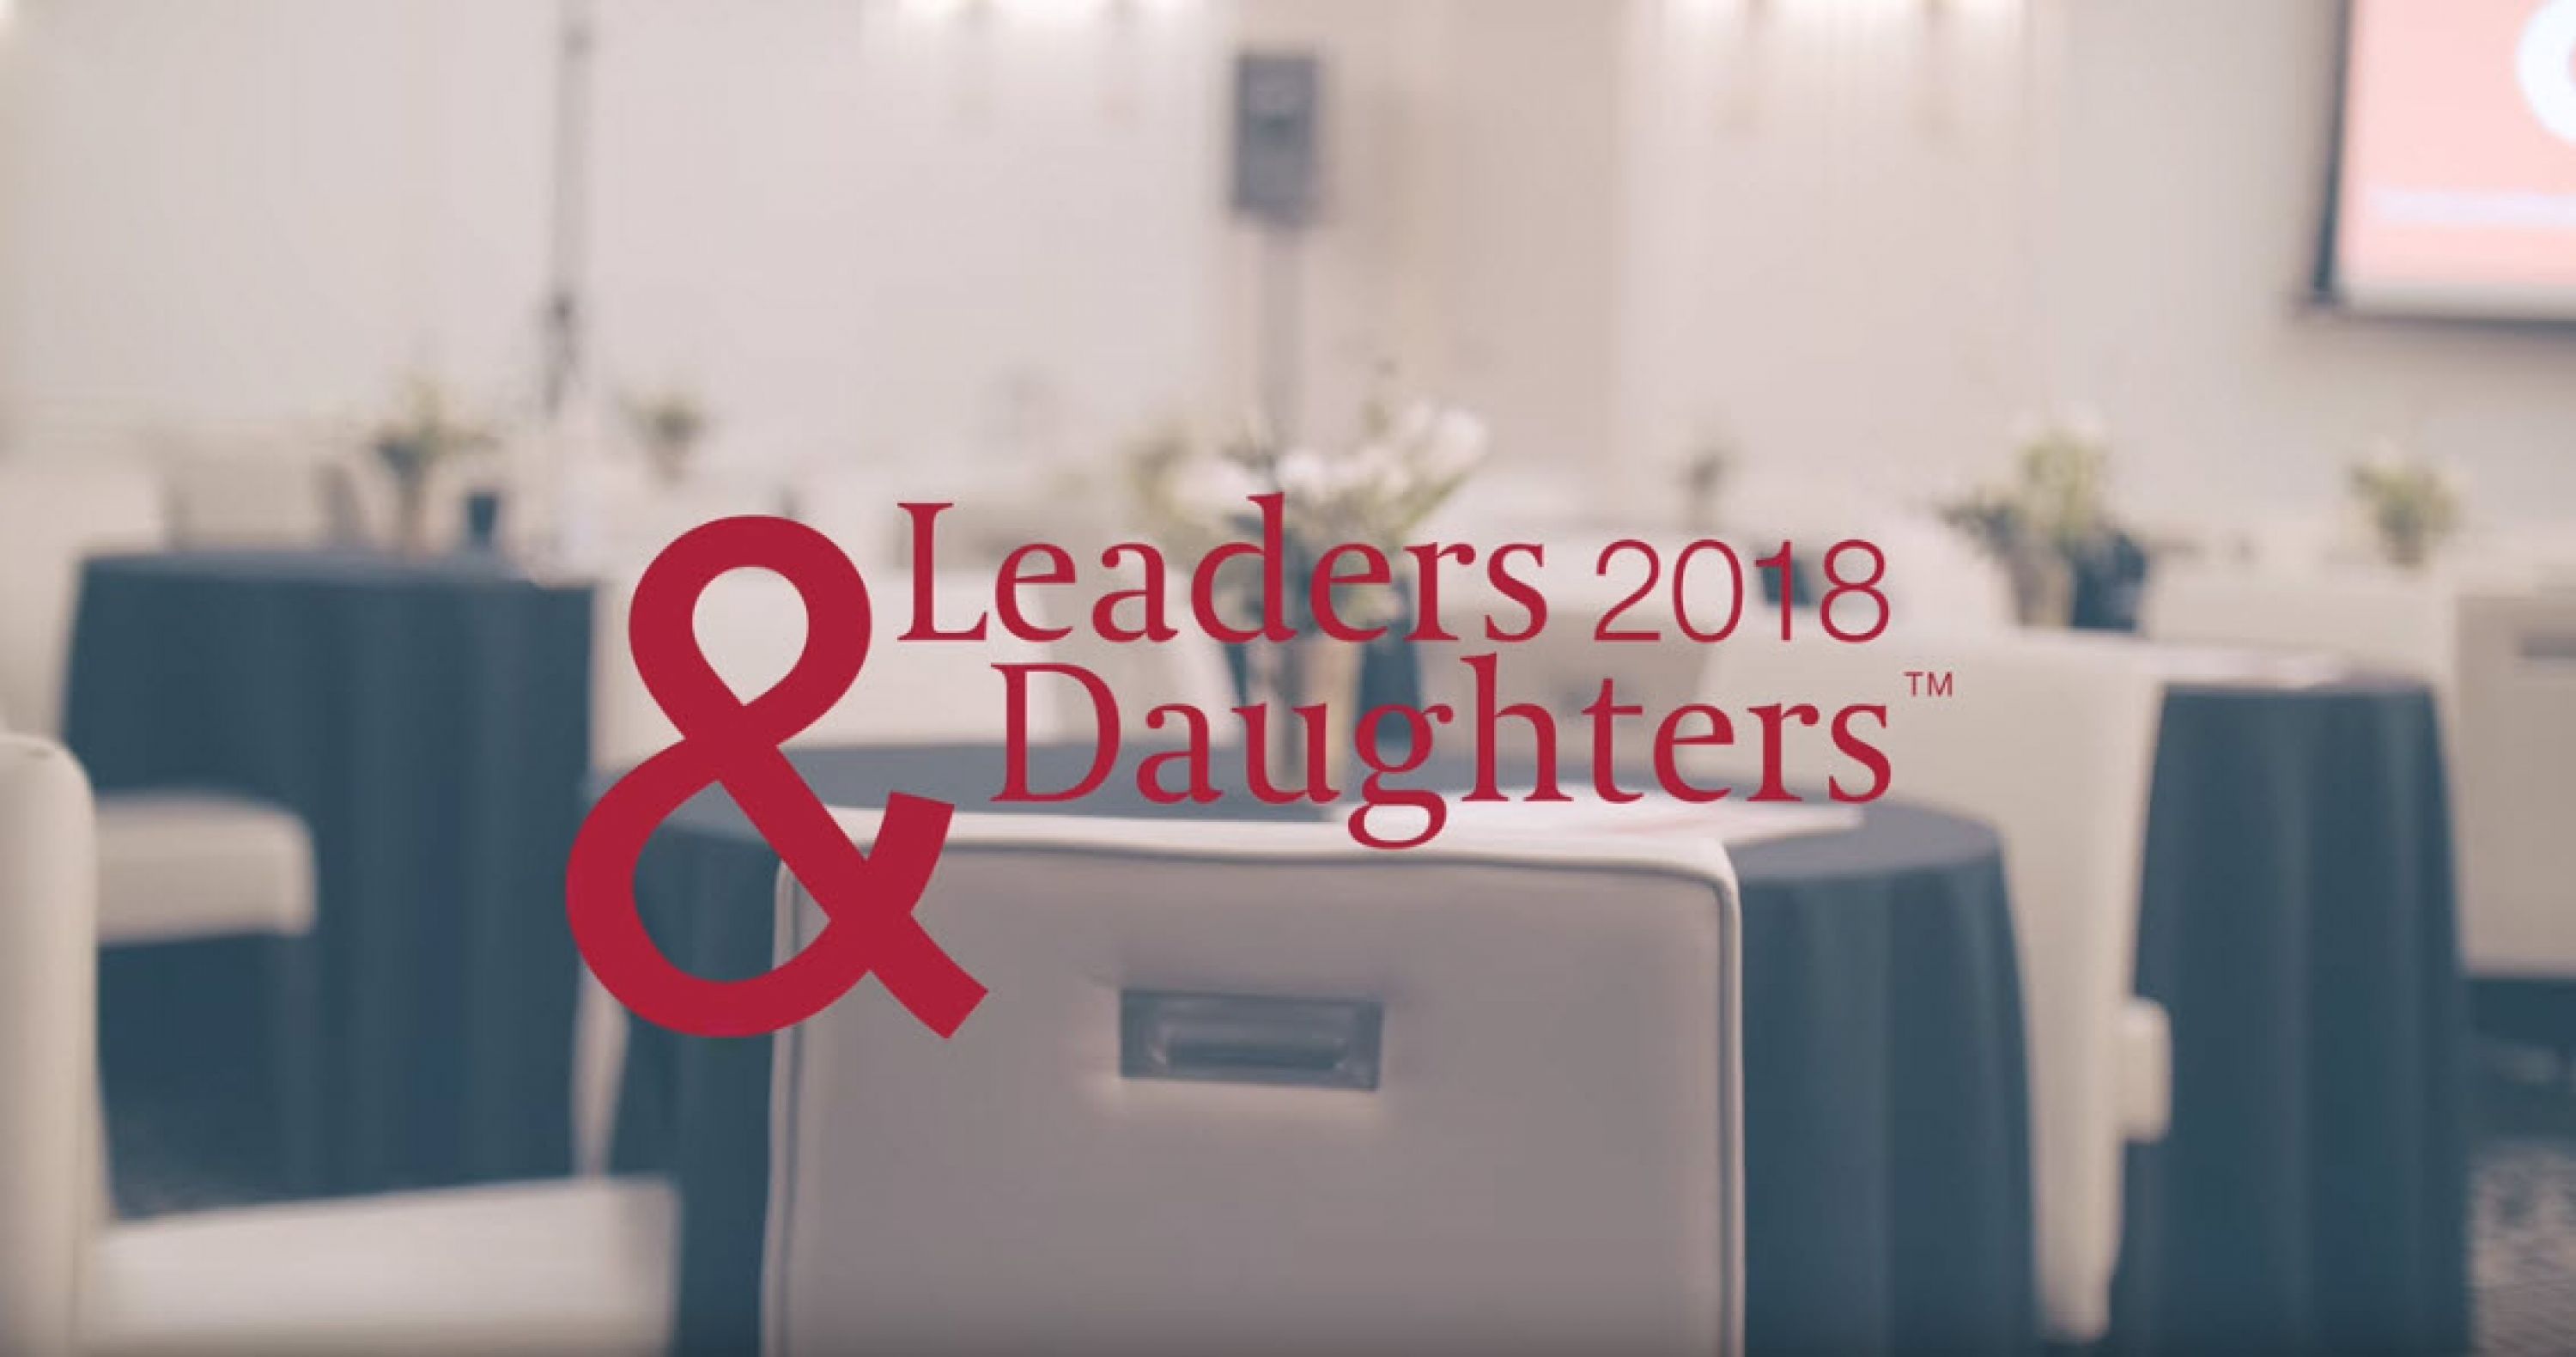 Leaders & Daughters, Montreal 2018 Highlights